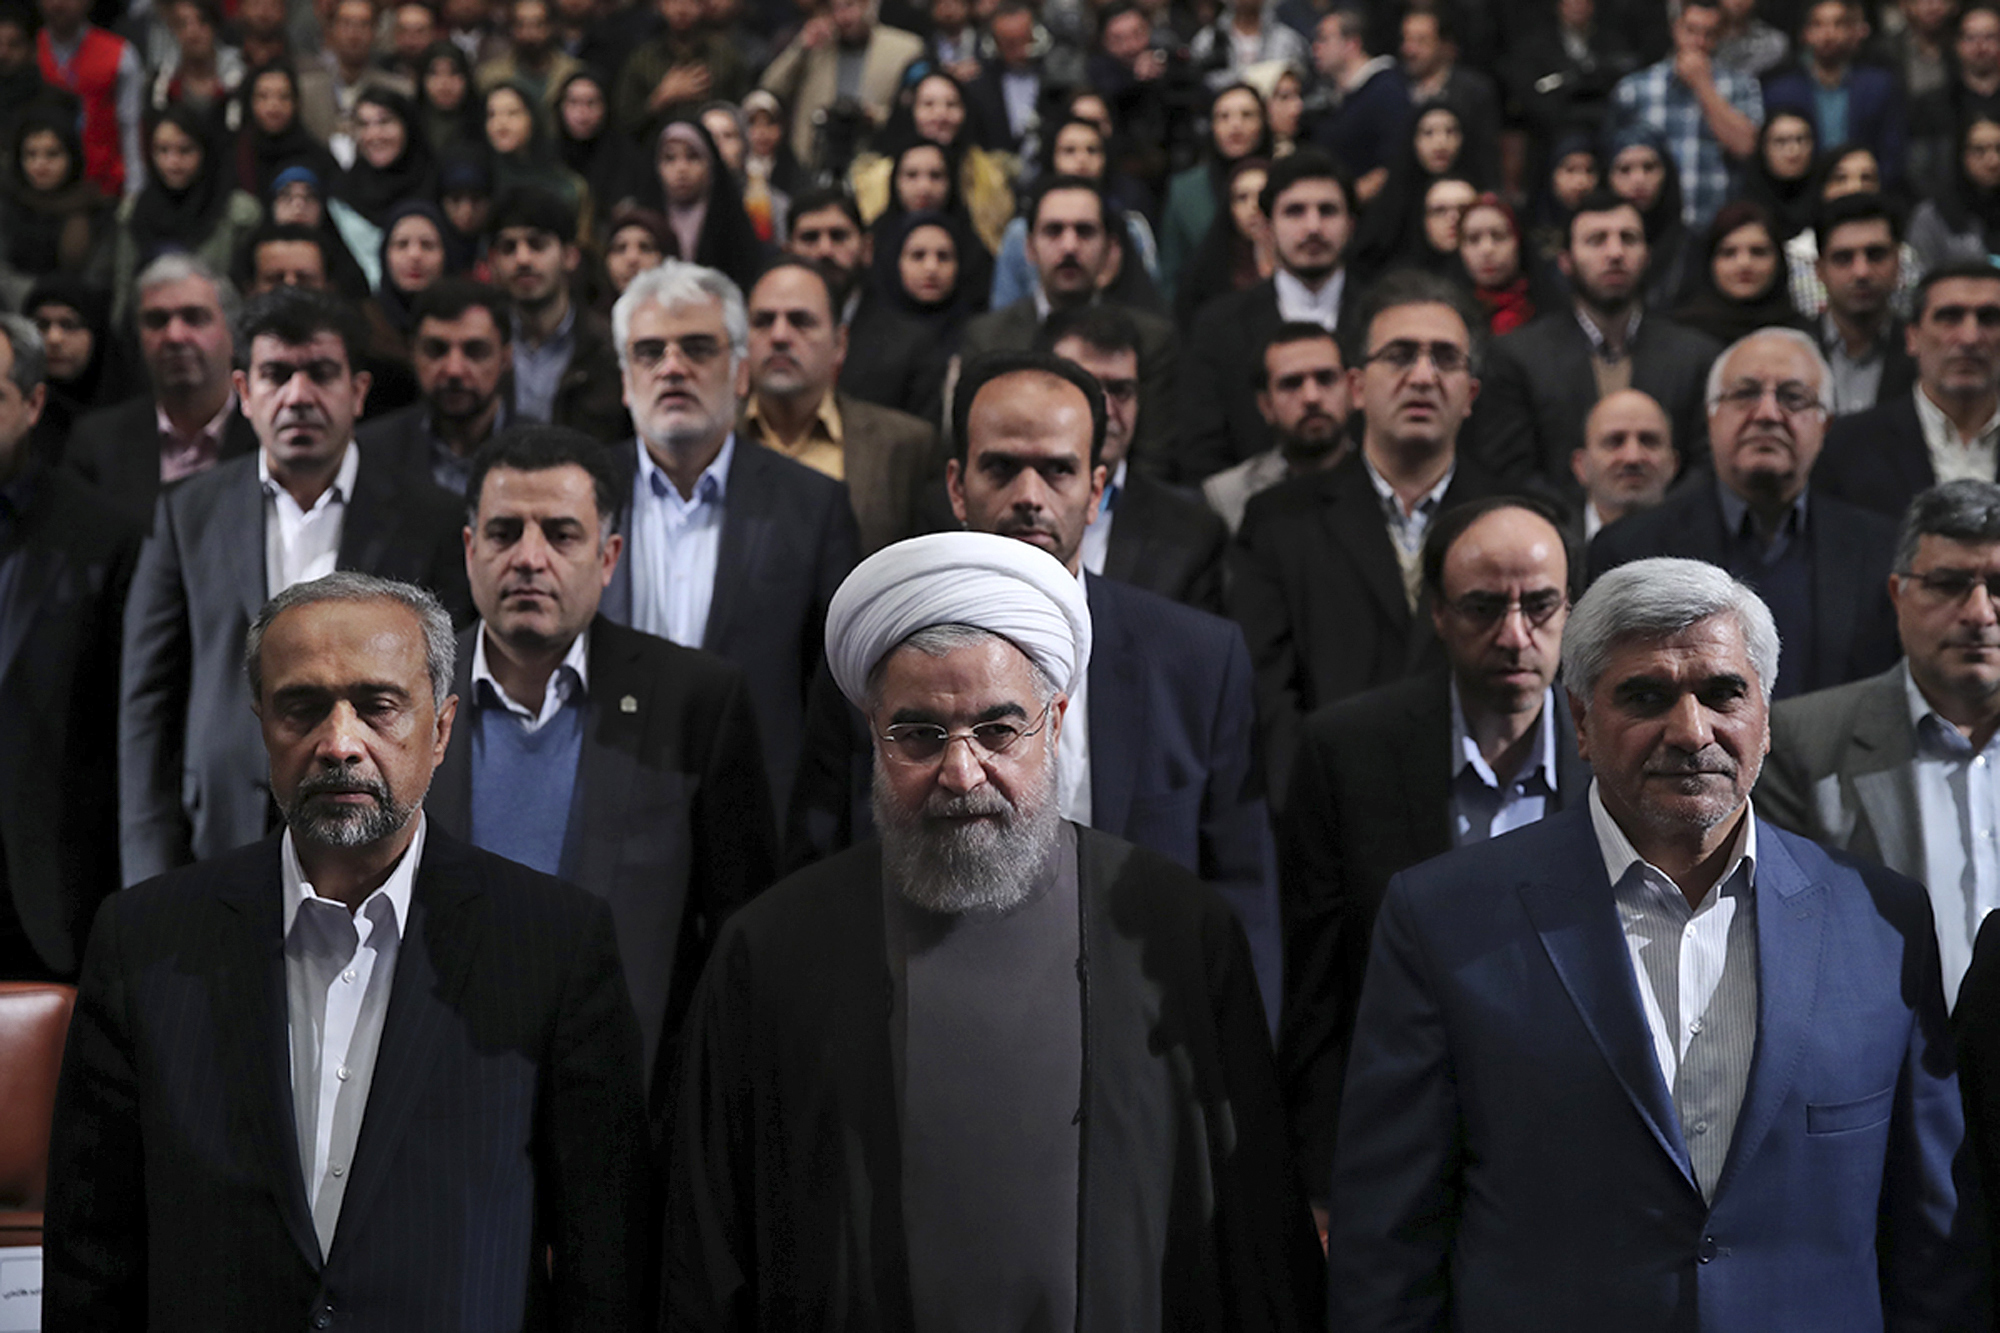 PHOTO: In this photo released by official website of the office of the Iranian Presidency, President Hassan Rouhani, center, listens to the national anthem at the start of a ceremony marking Student Day at Tehran University in Tehran, Iran, Dec. 6, 2016.